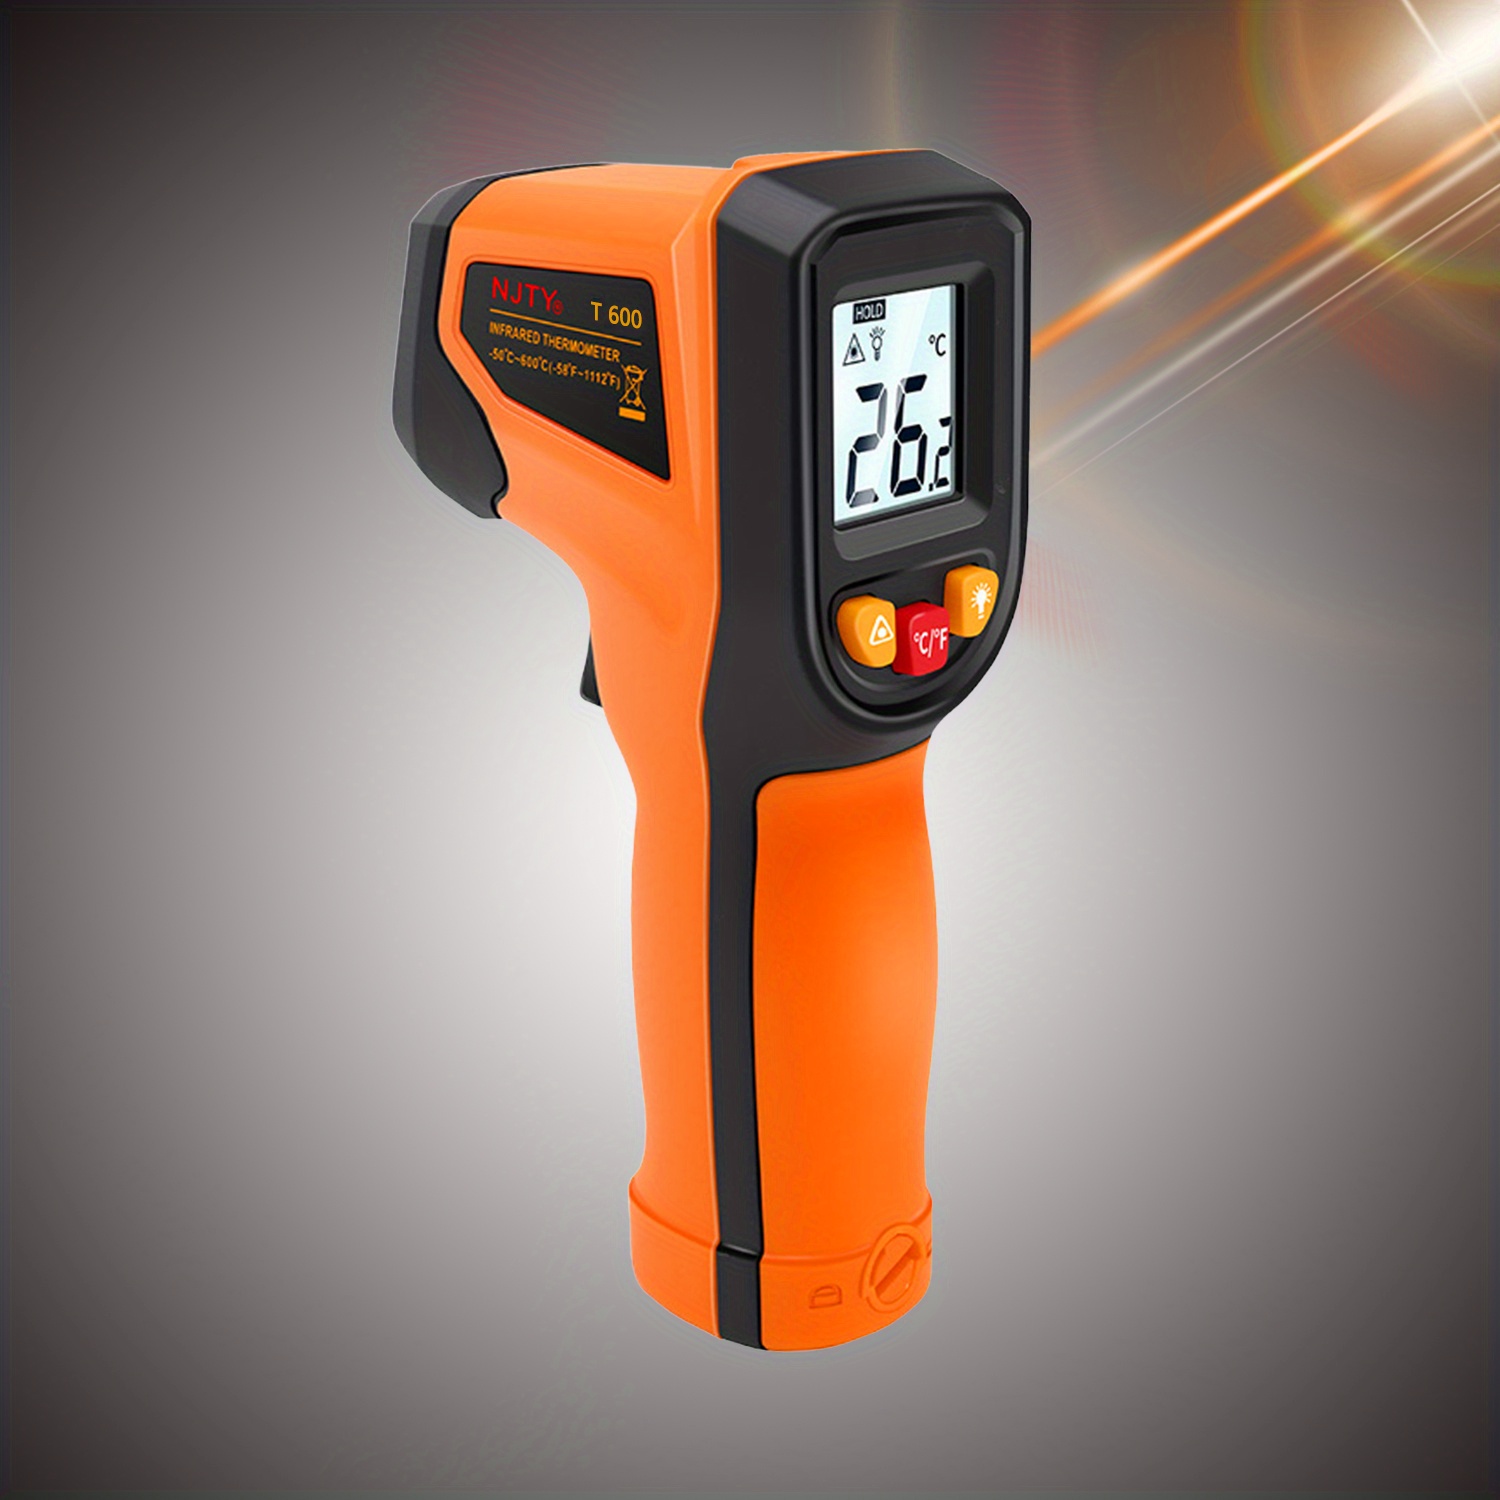 AC Temperature Guns and Thermometers